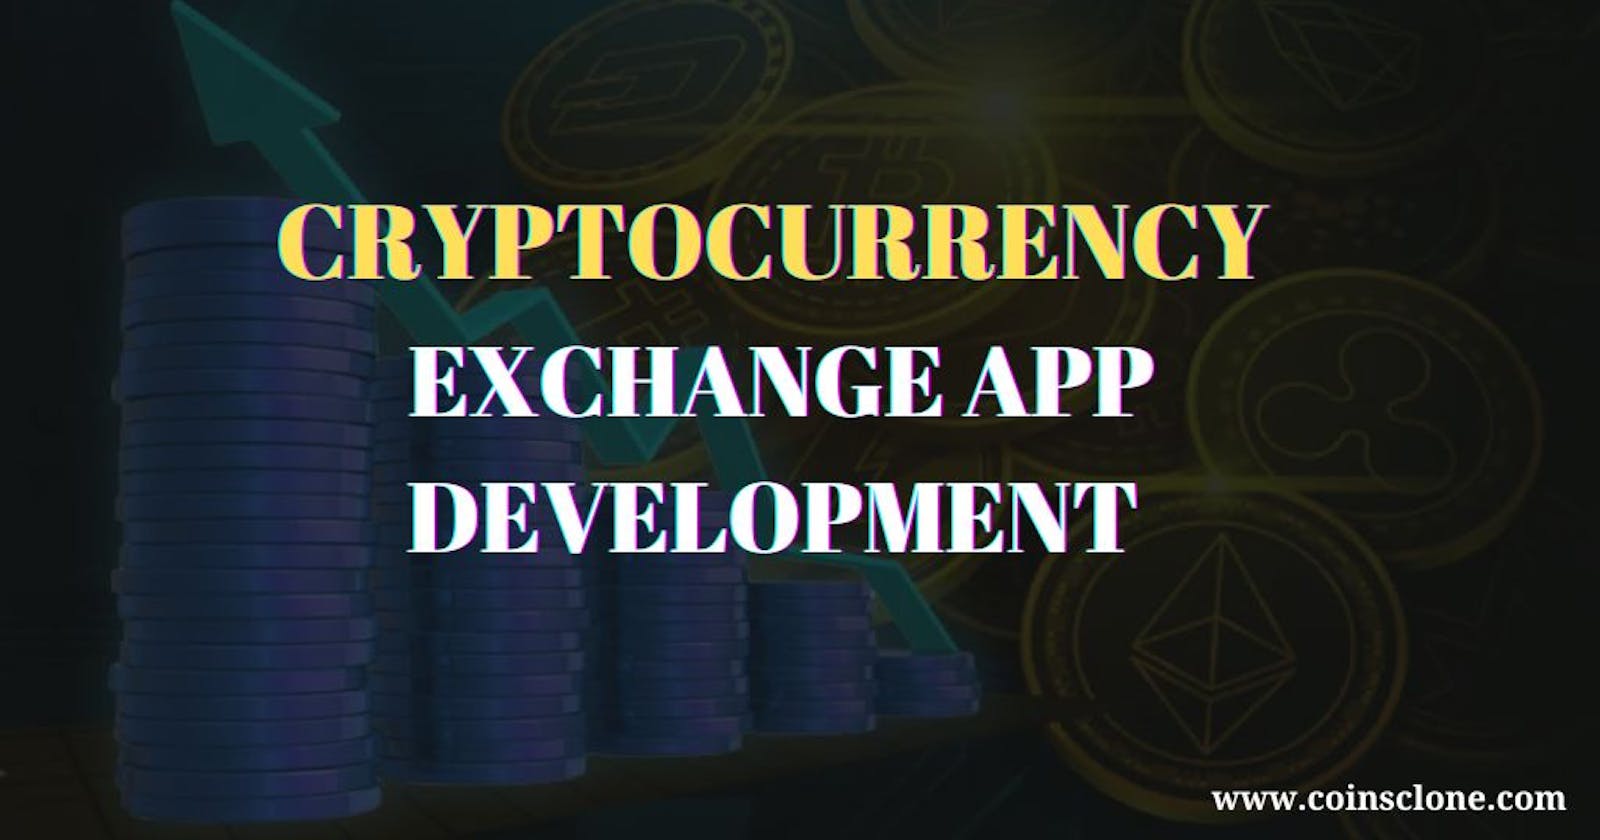 What are the Benefits of using a Cryptocurrency Exchange app?